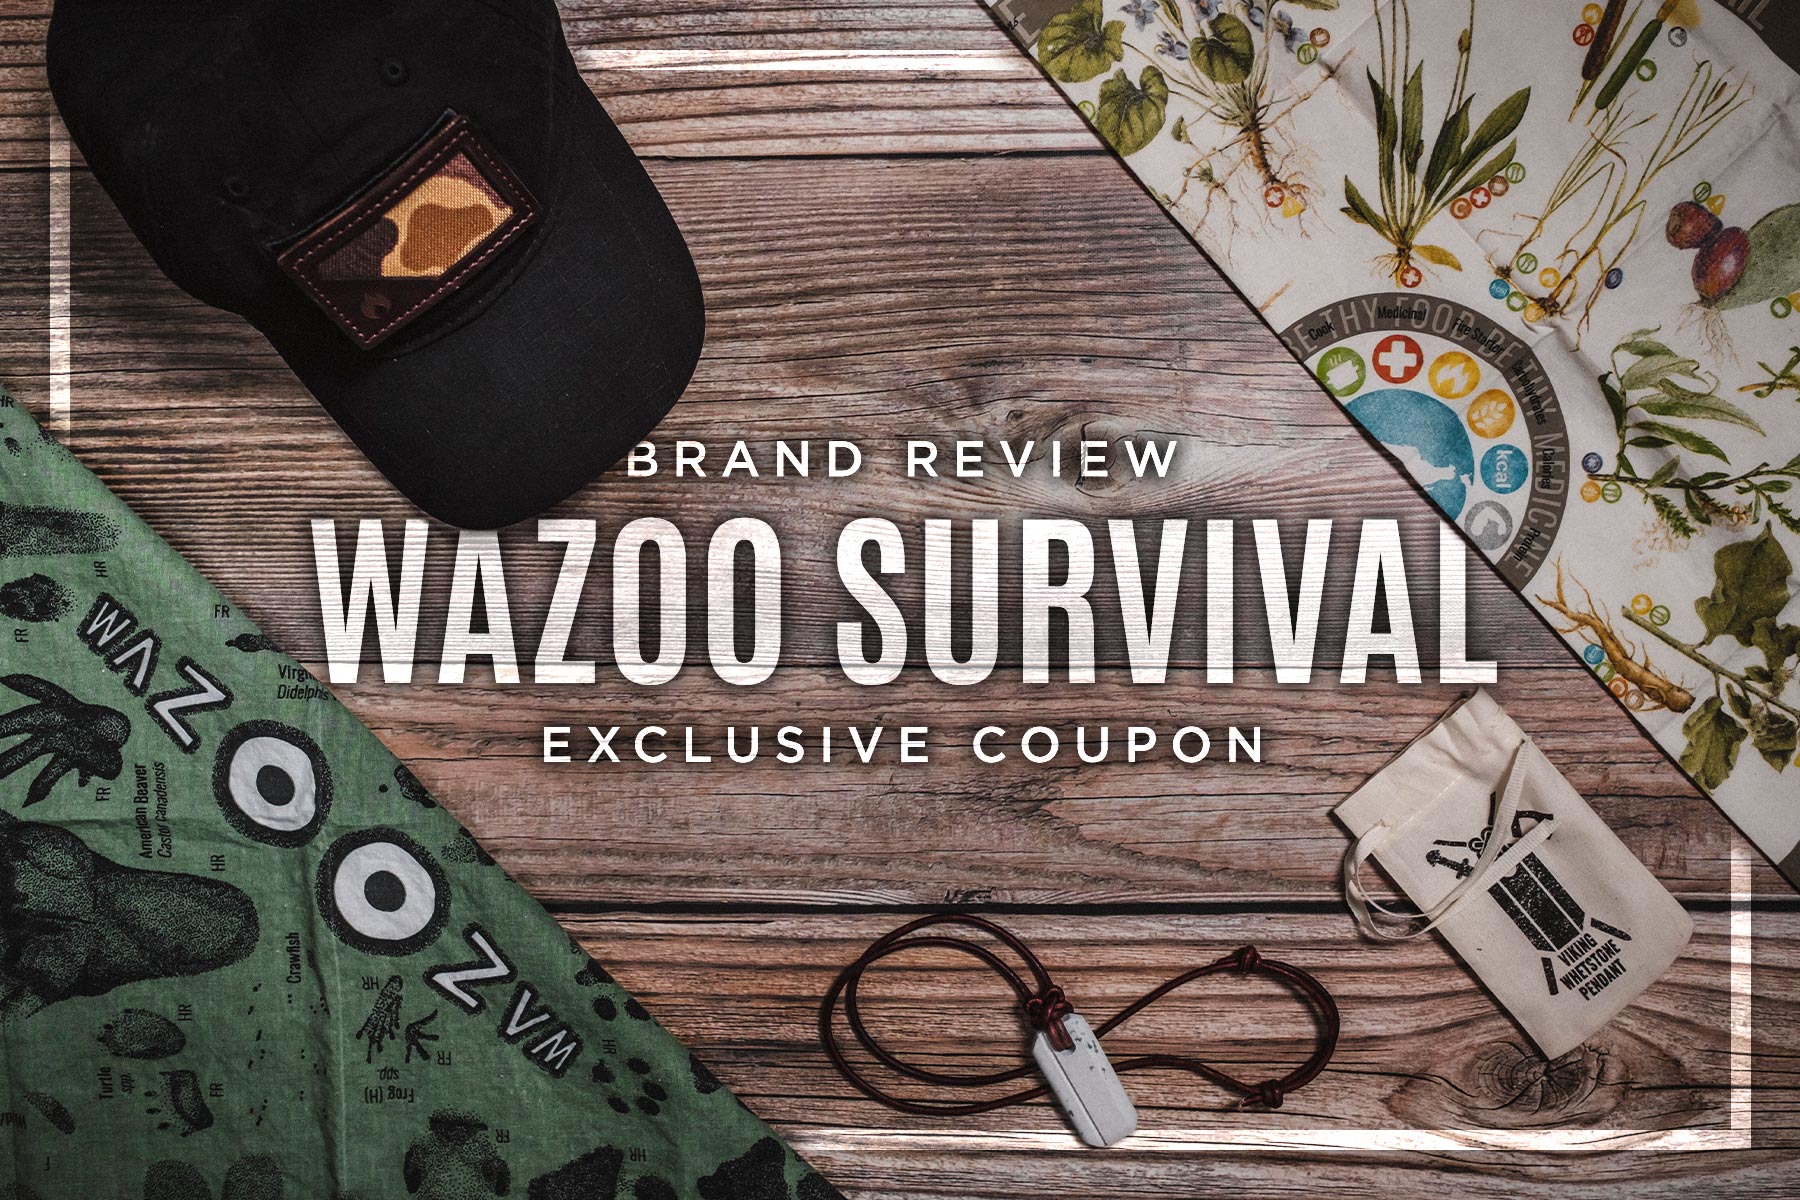 BATTLBOX Wazoo Survival Gear Bandana with Pictures and Facts